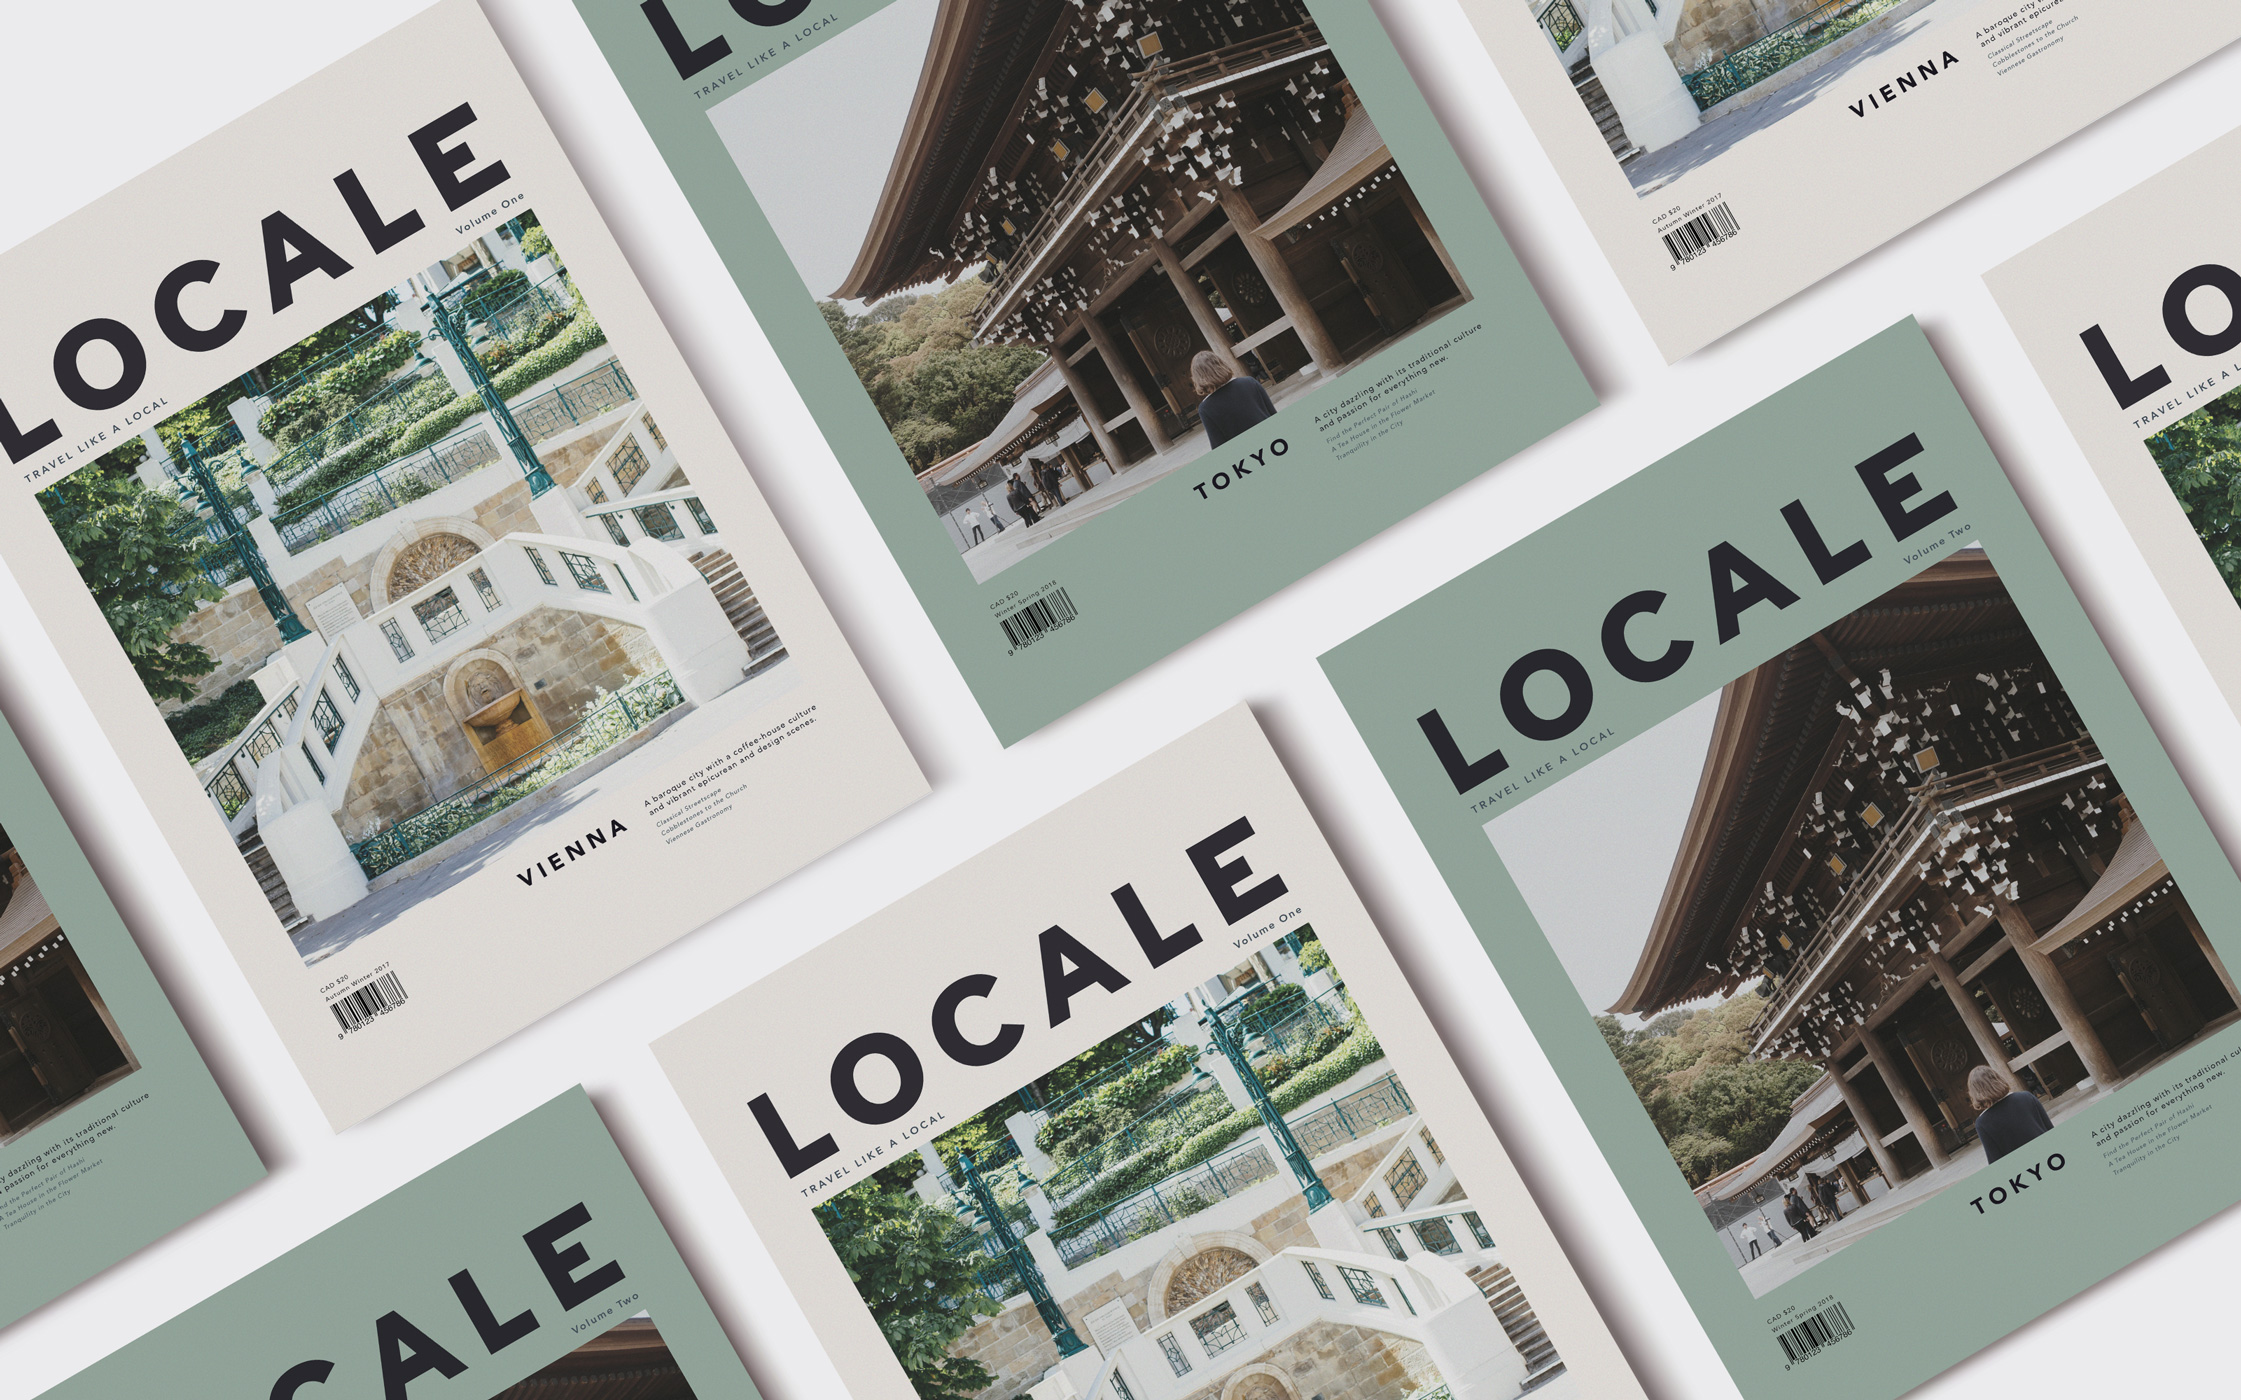 Yearly covers for Locale Magazine - Vienna and Tokyo issues